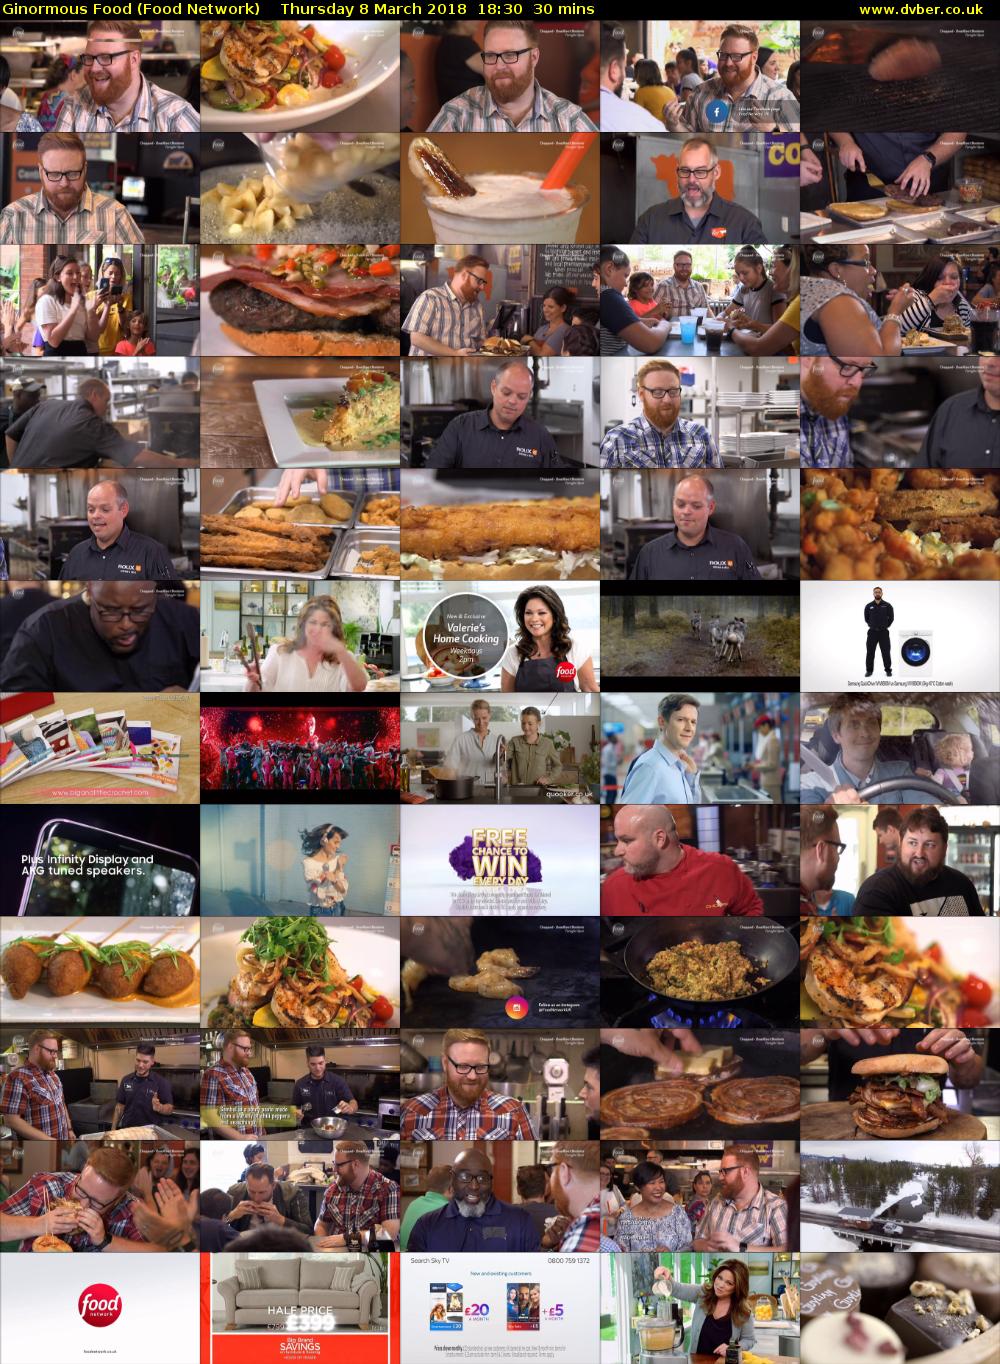 Ginormous Food (Food Network) Thursday 8 March 2018 18:30 - 19:00